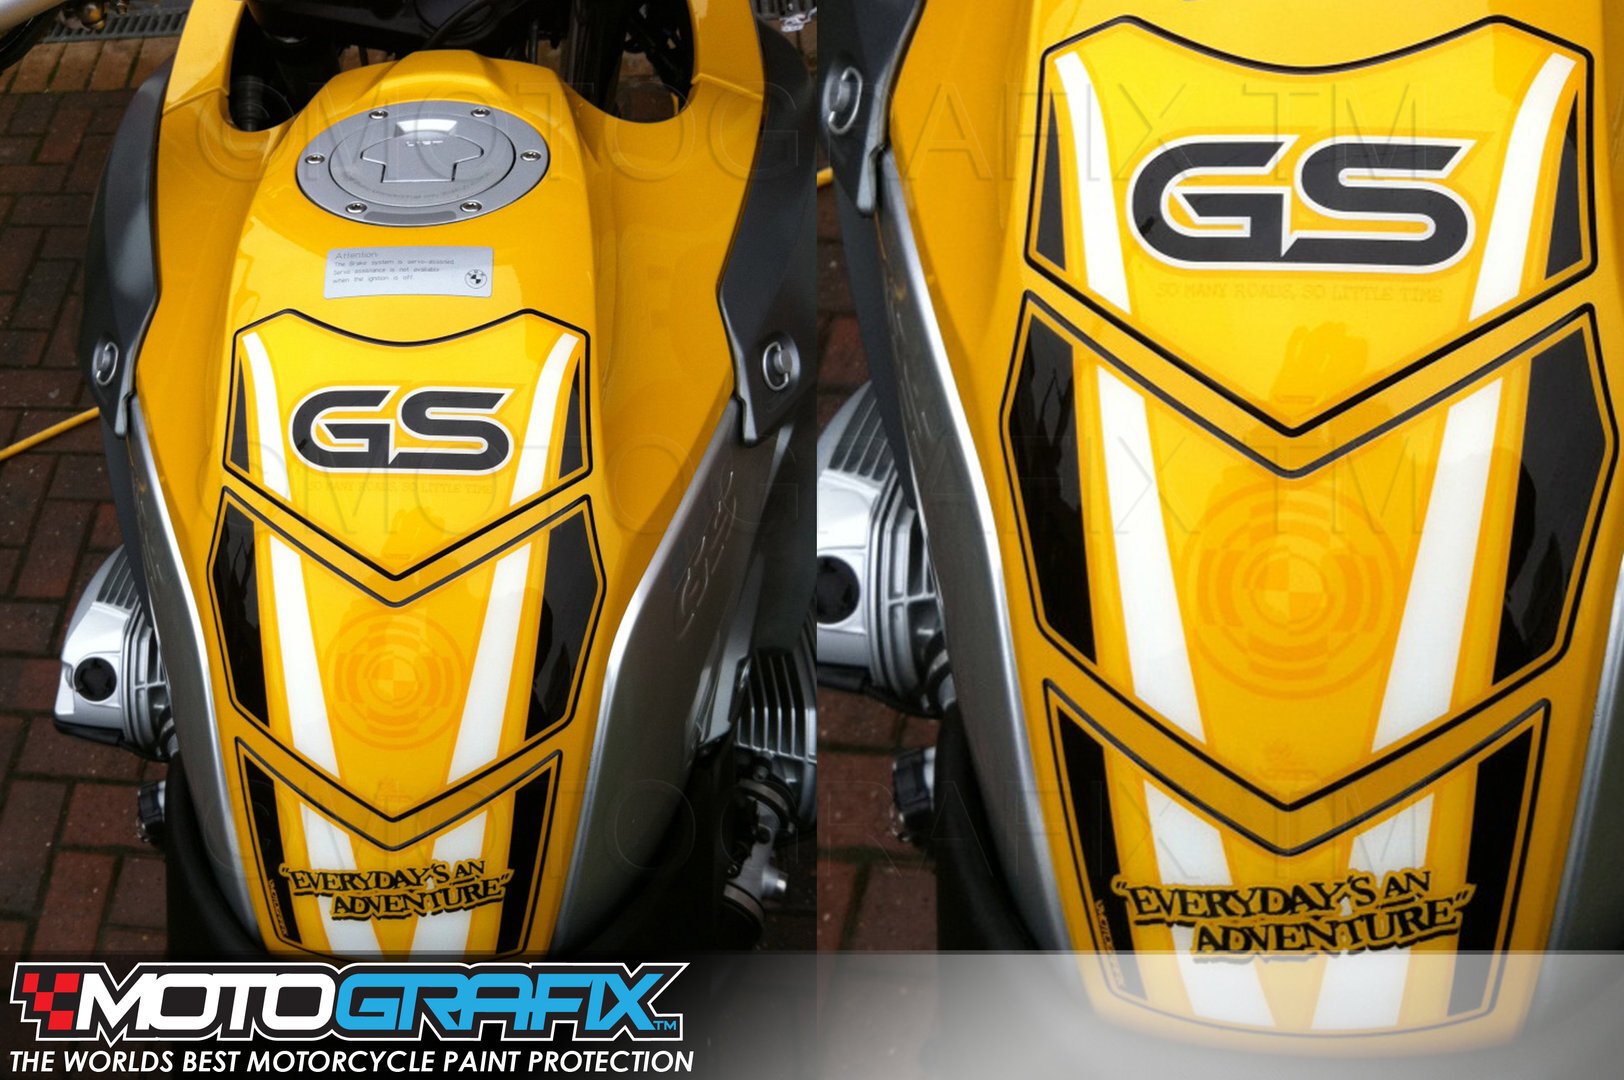 BMW R1200GS YELLOW Motorcycle Tank Pad Protector 2007?07--3D Gel